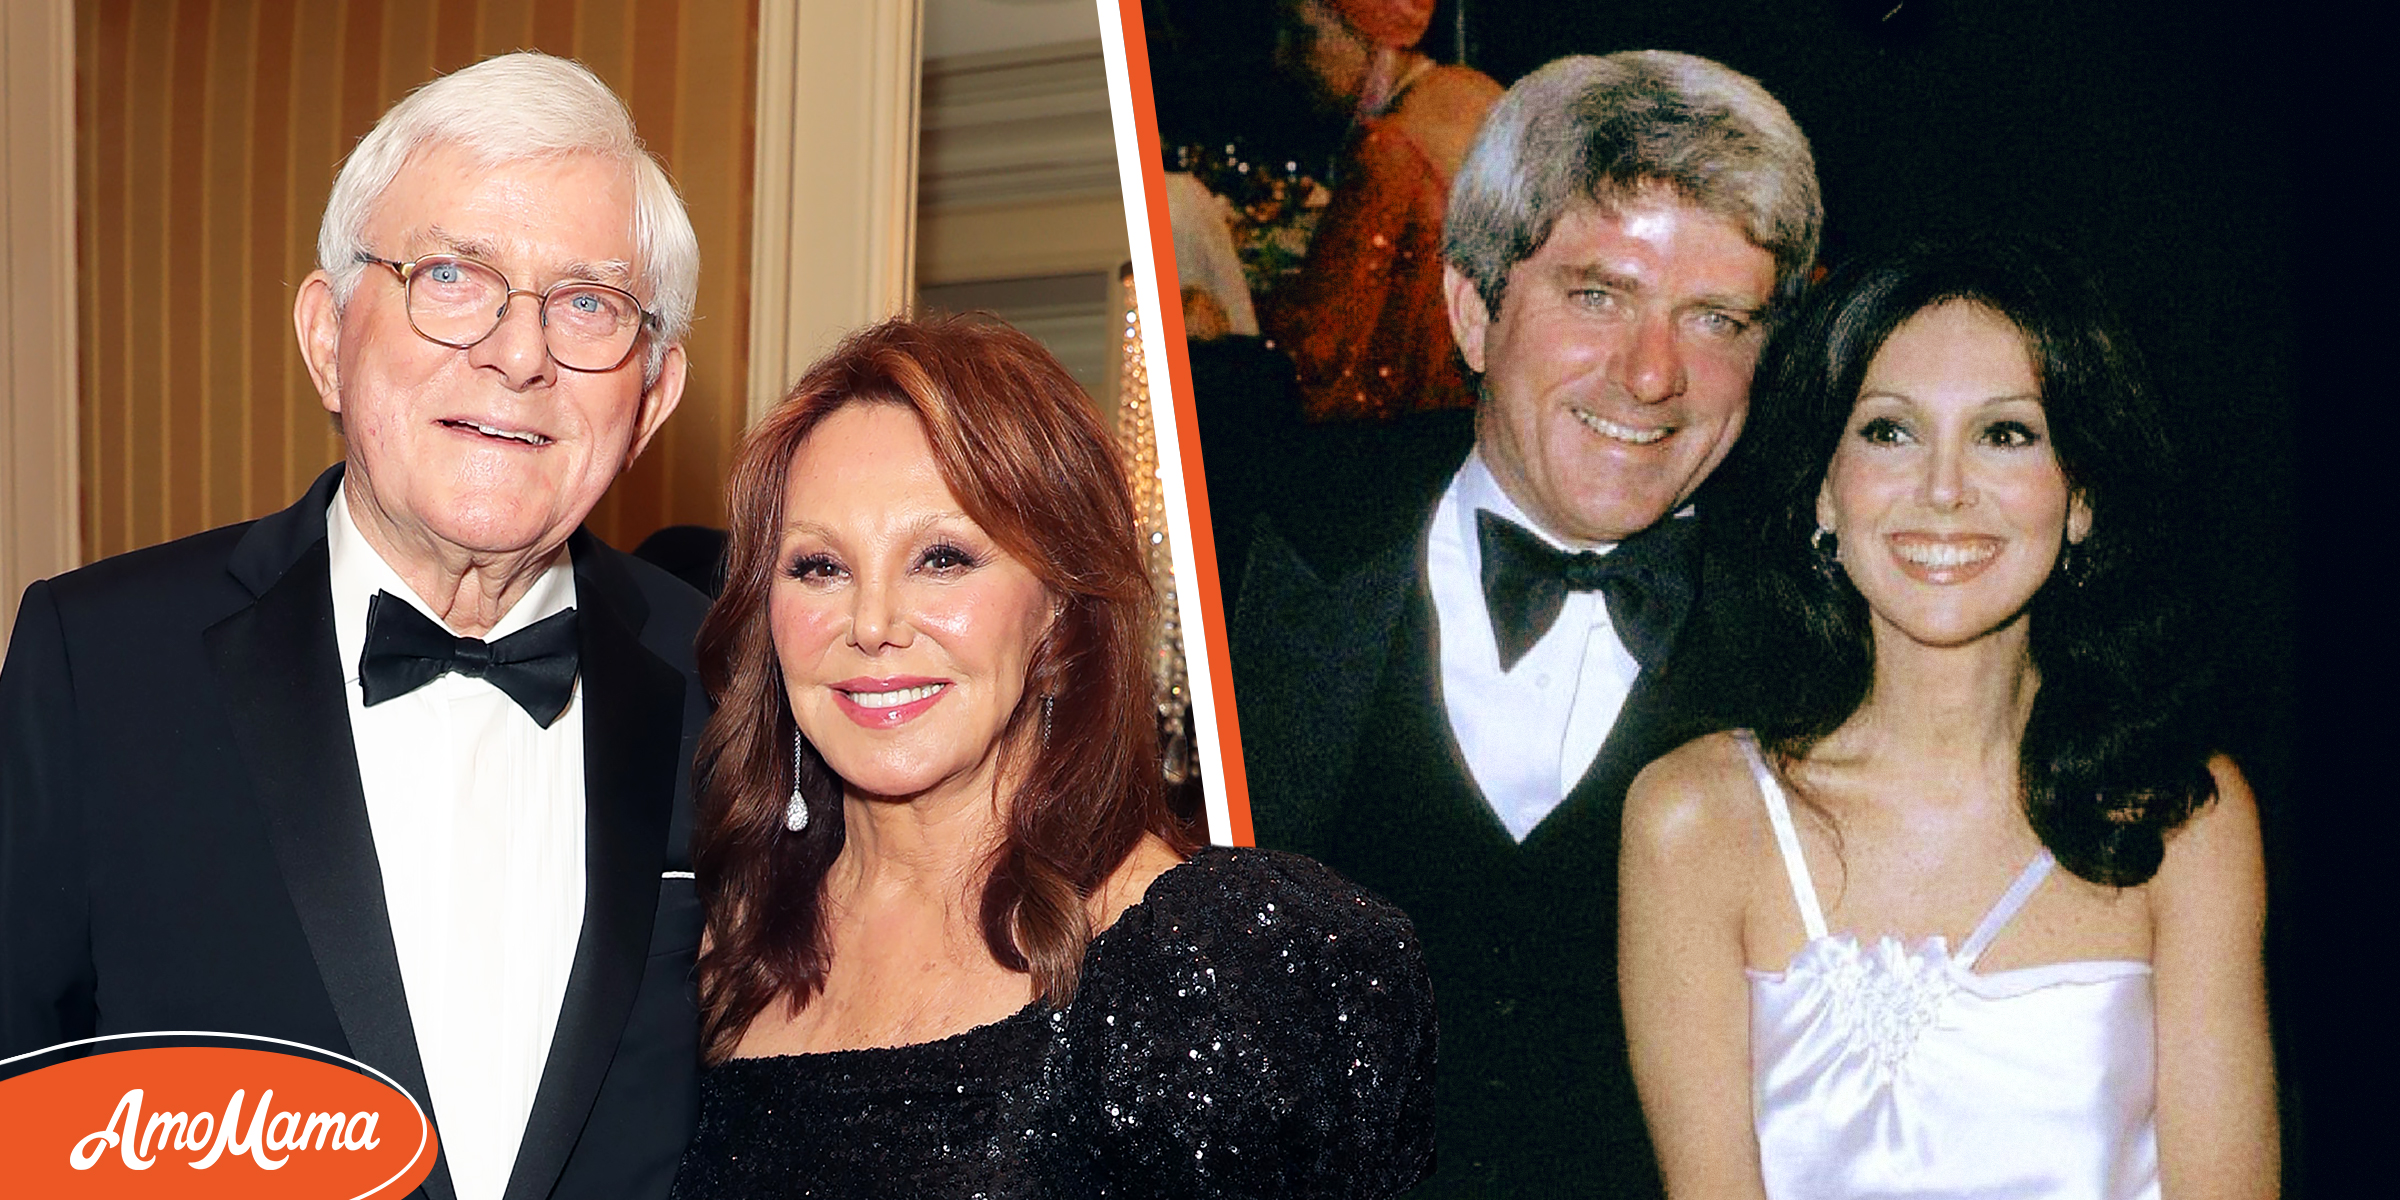 Marlo shares a TBT photo with Phil Donahue where ‘He looks so handsome in his Tux’